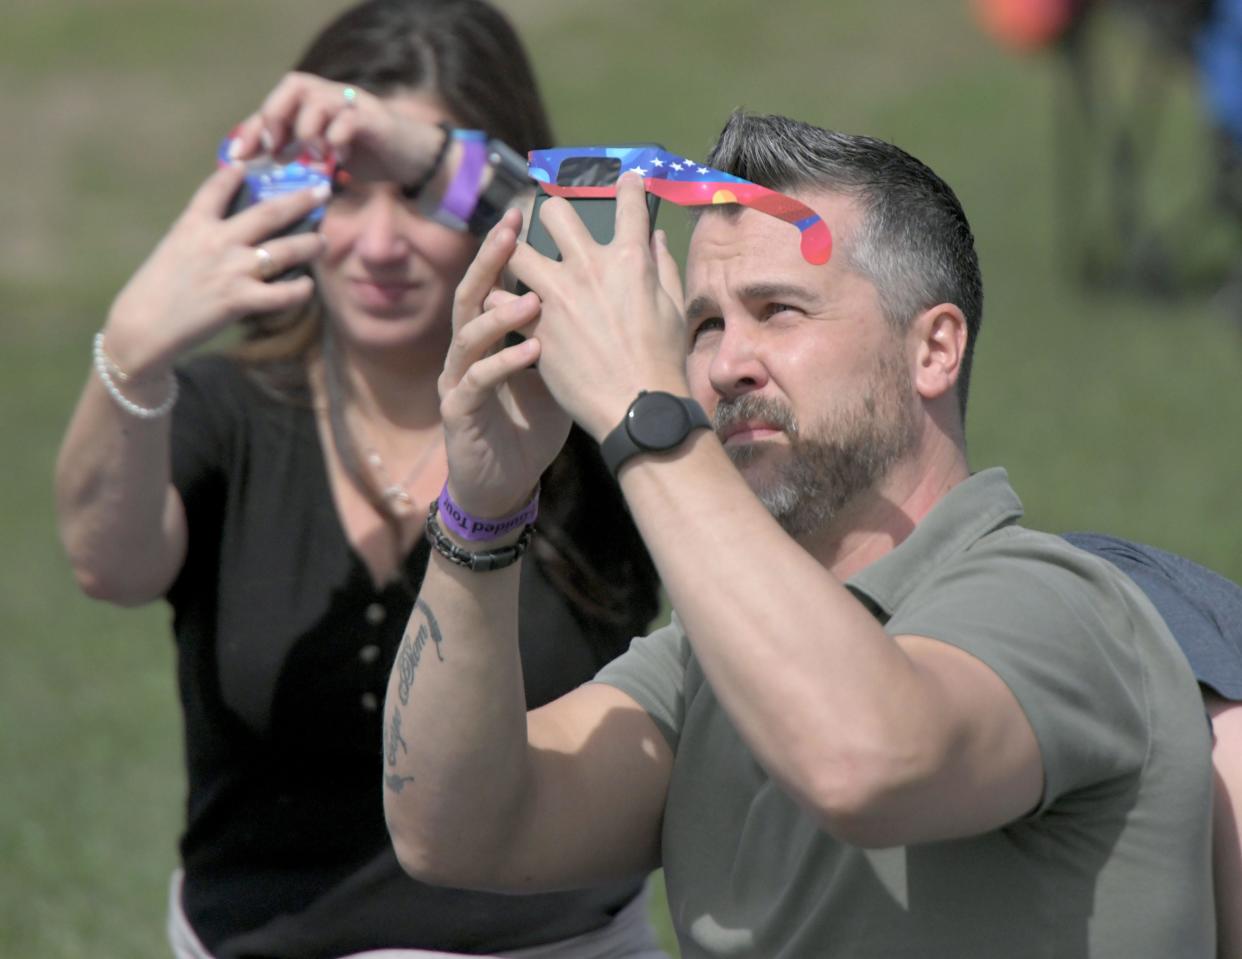 Shutterbugs use eclipse glasses as a filter for their phones during the eclipse.